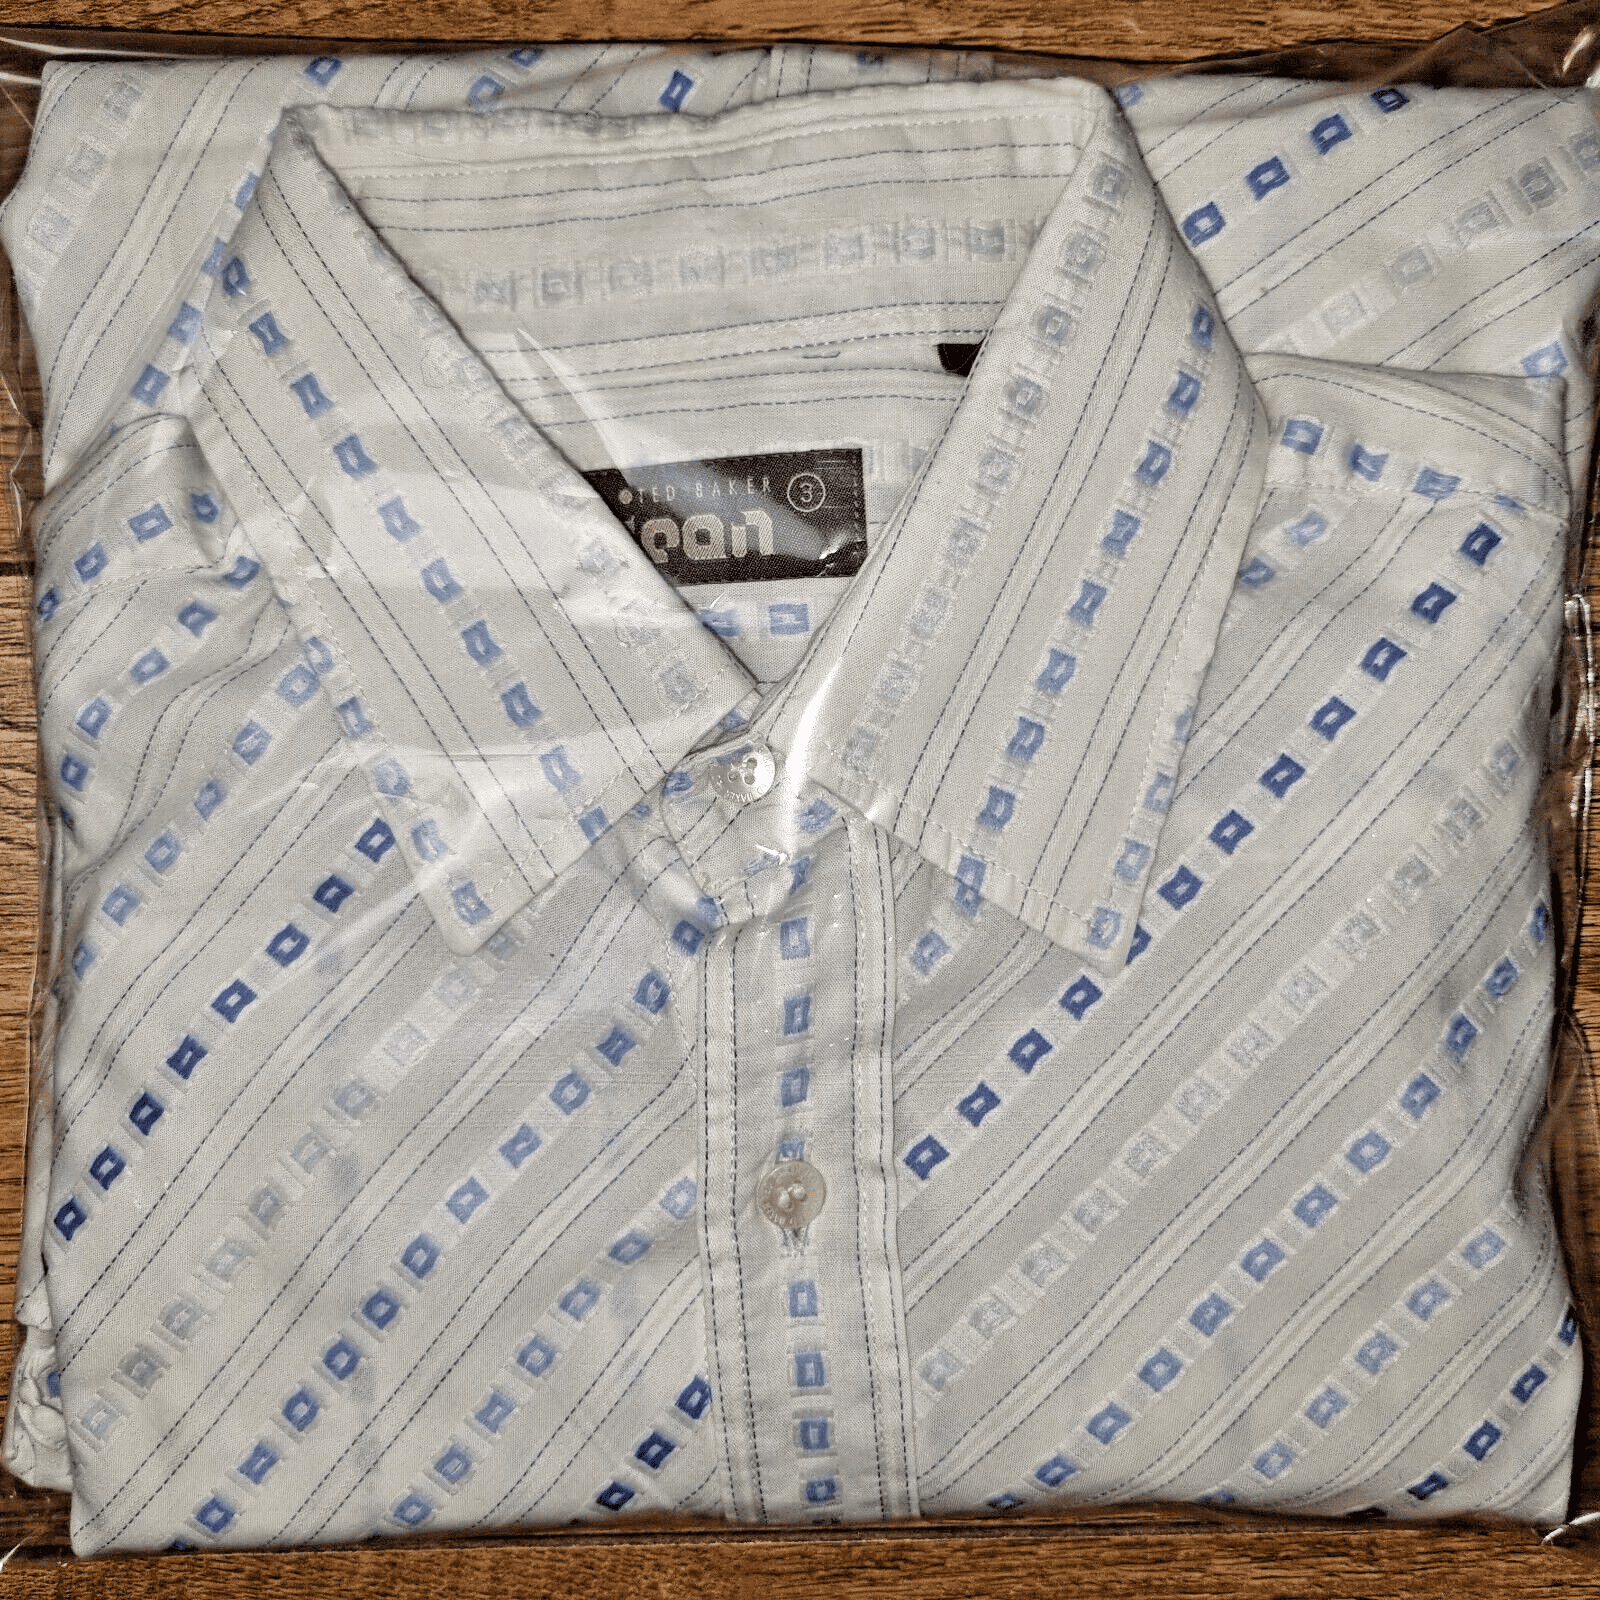 Ted Baker Jeans Shirt White Small Blue Pattern Size 3 Long Sleeves Casual Smart - Bonnie Lassio